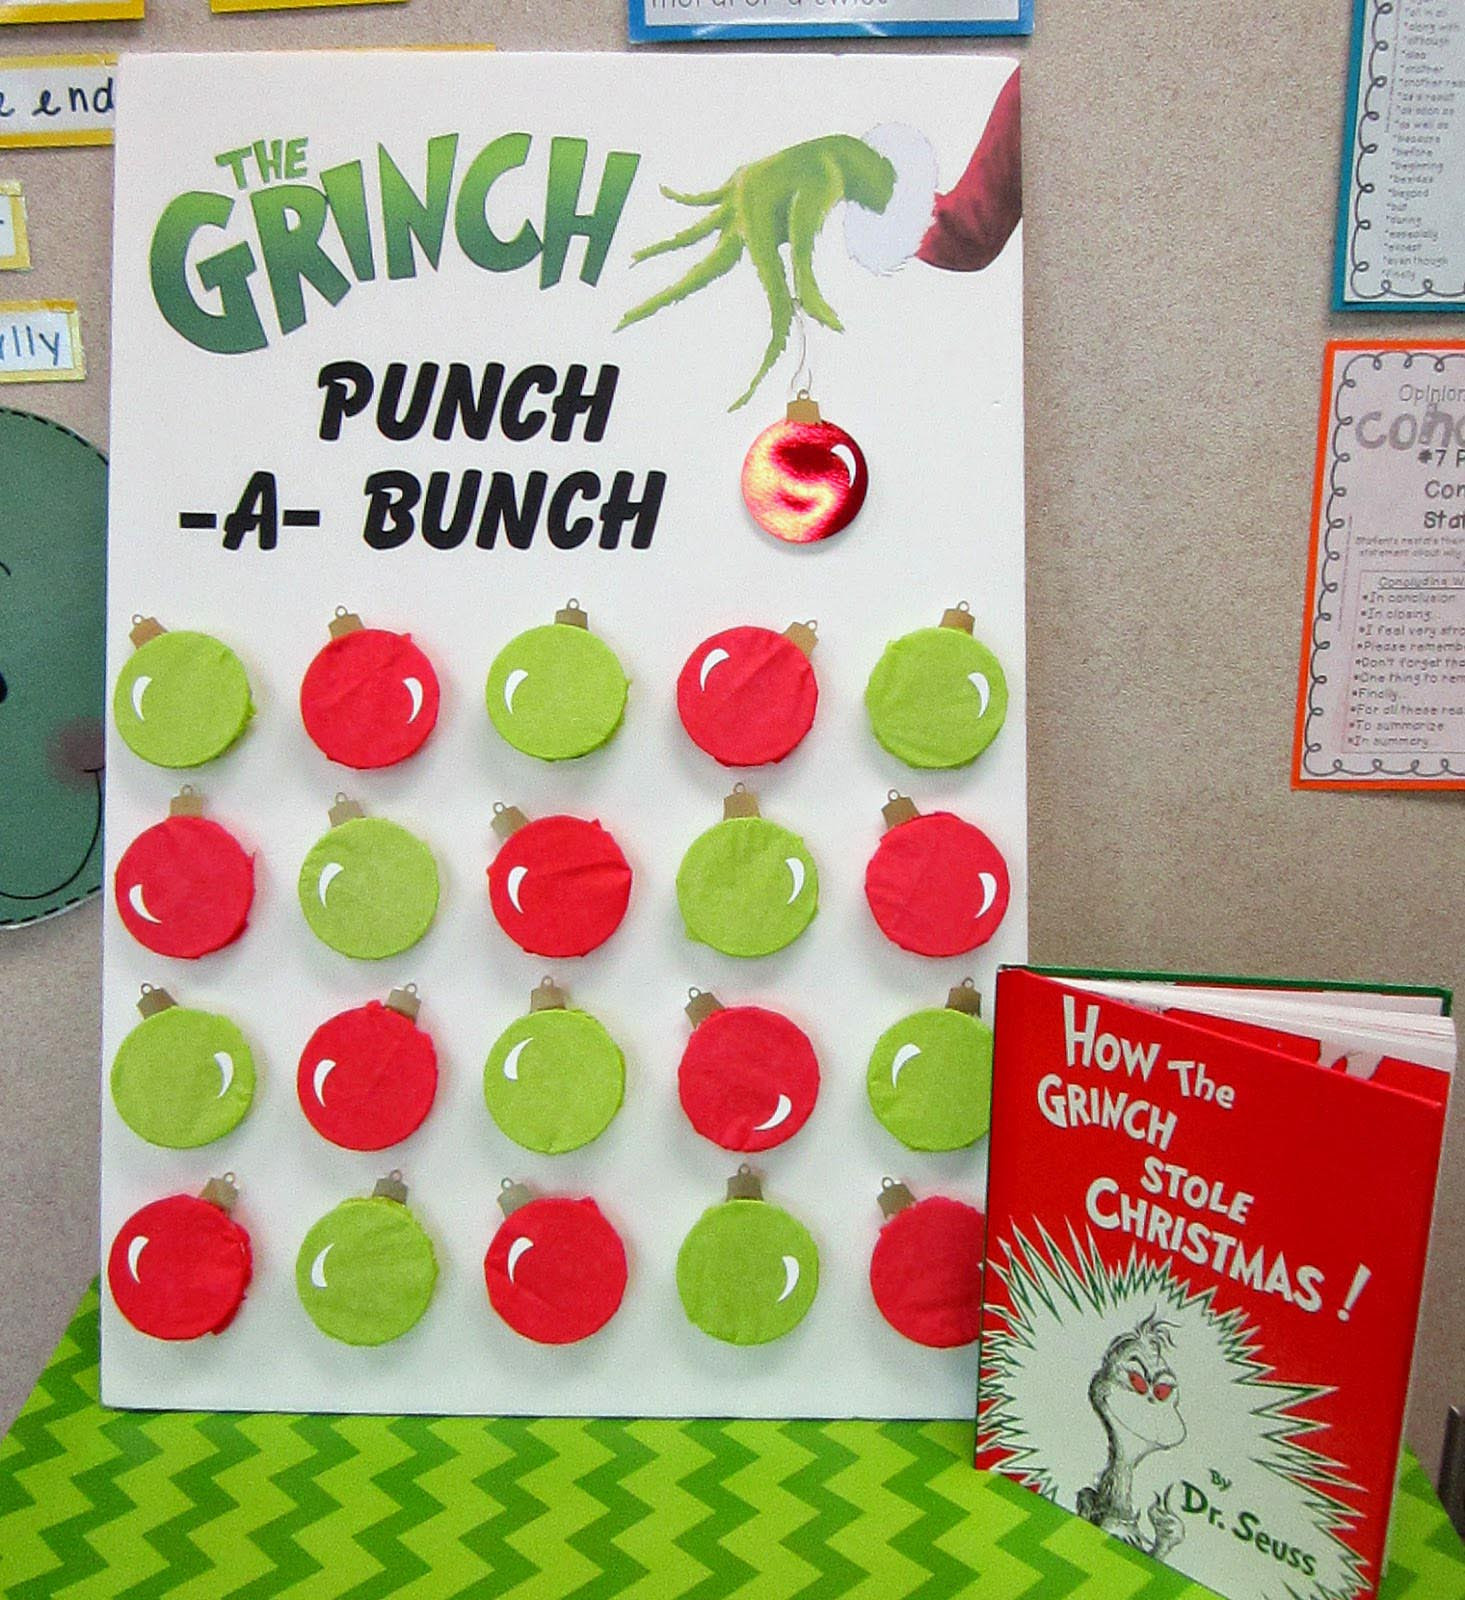 2Nd Grade Holiday Party Ideas
 Teenager Christmas Party Games